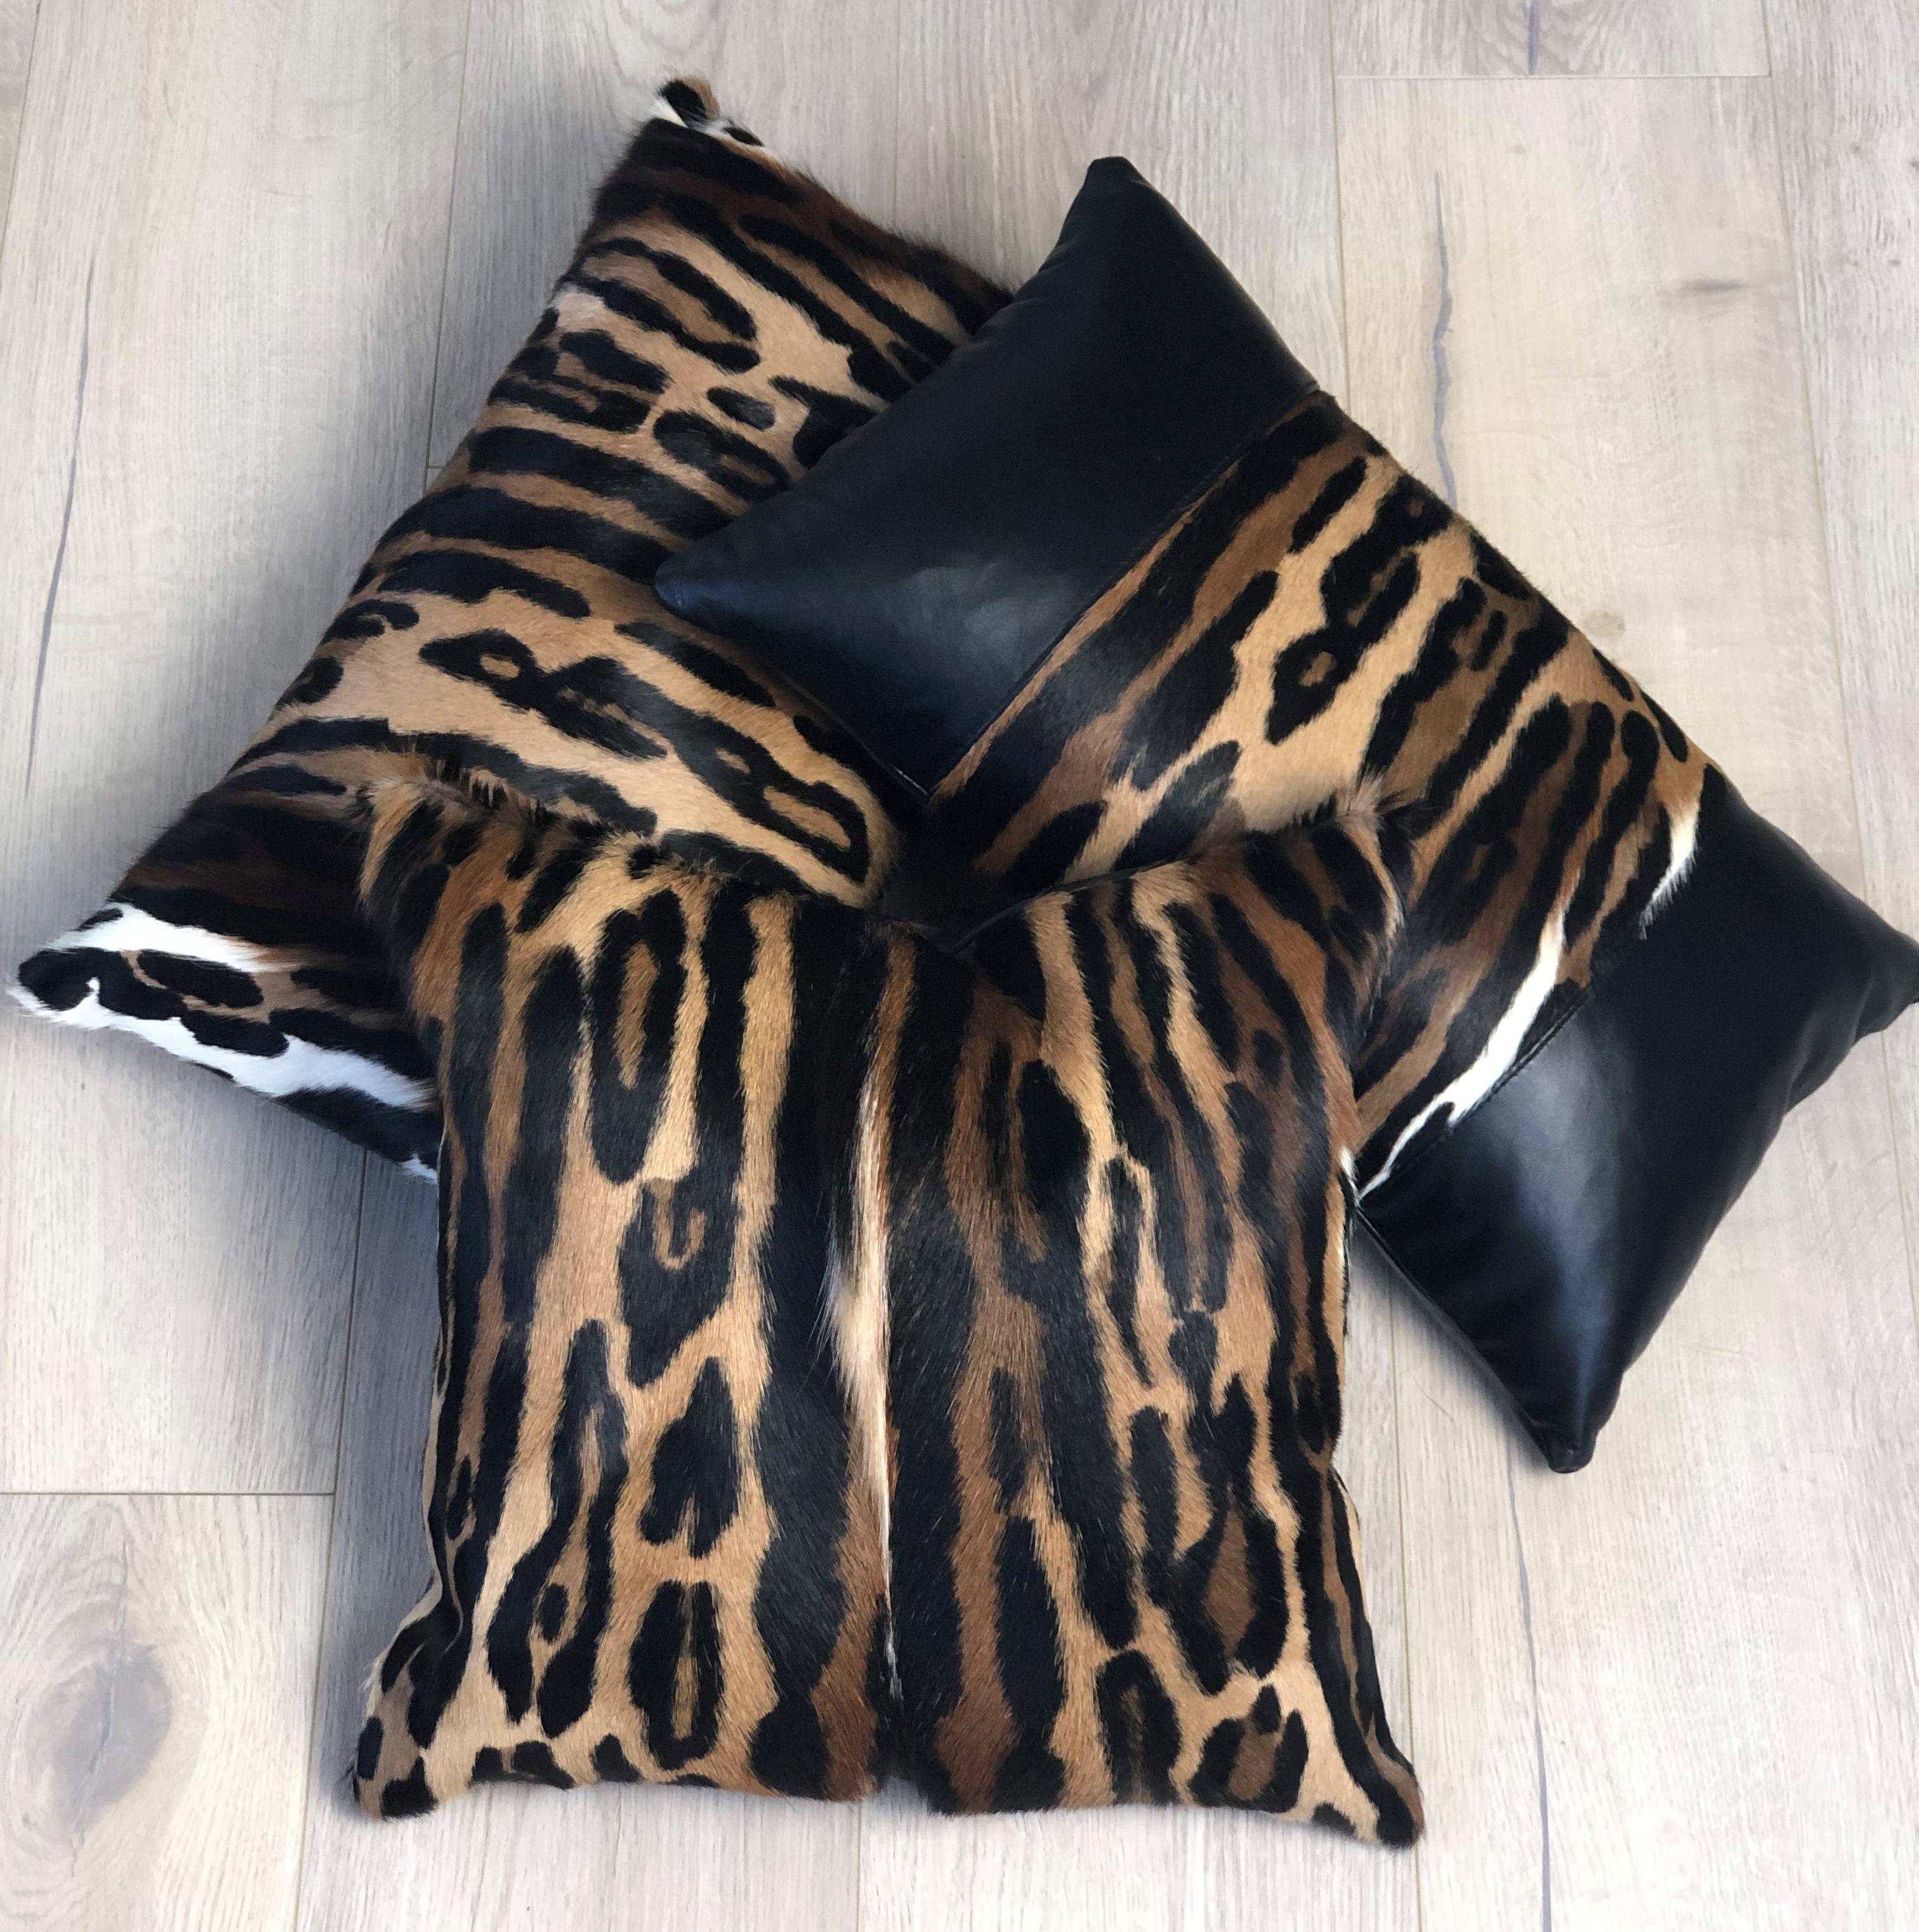 Leopard Print Lumbar Pillow with Black Leather In New Condition For Sale In Dural, AU